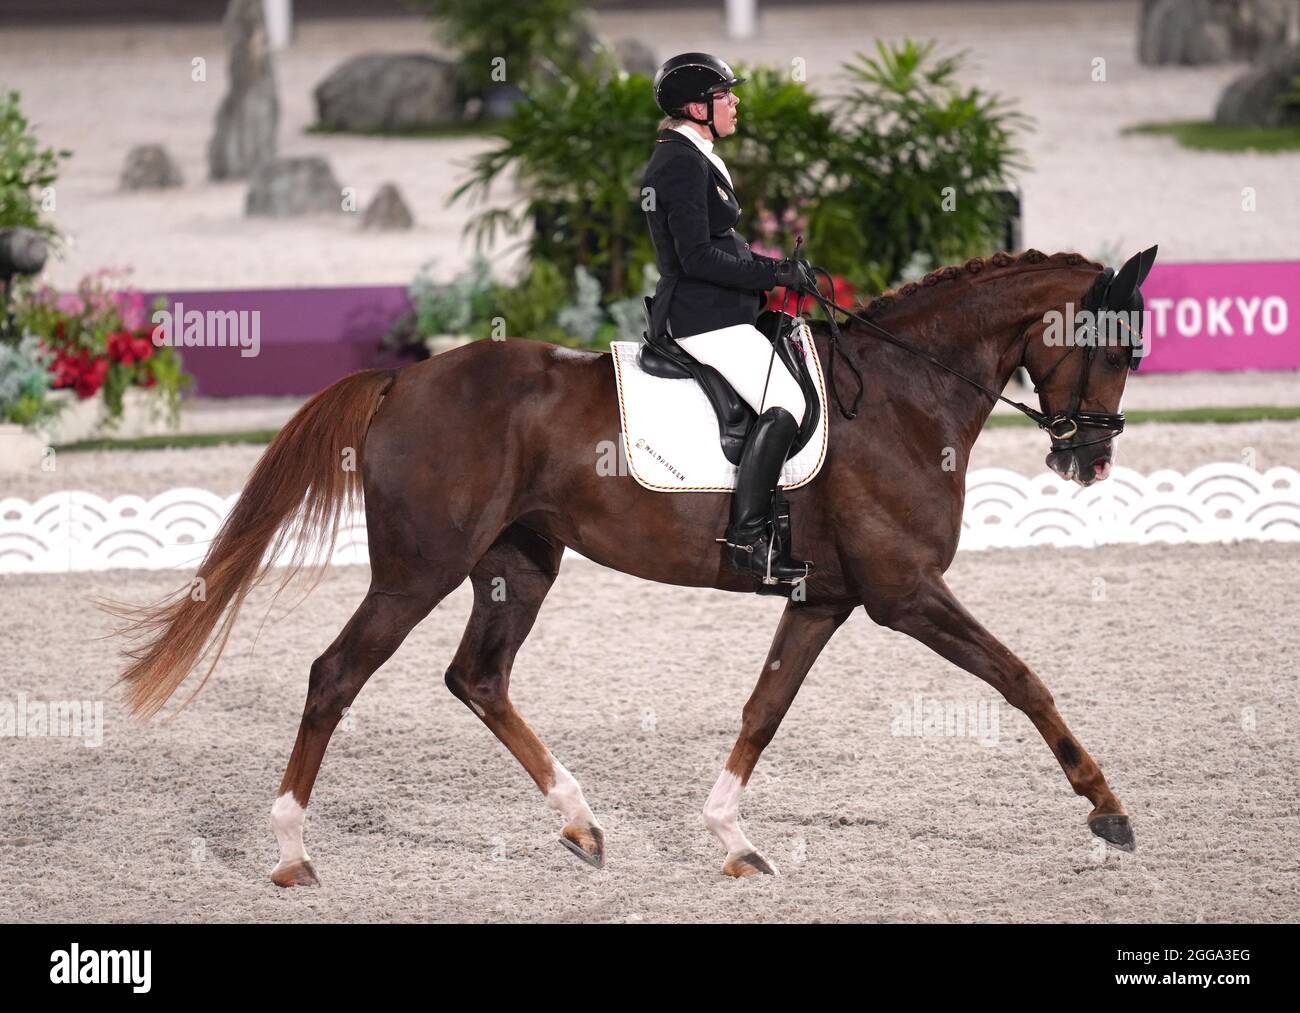 Germany's Heidemarie Dresing with horse La Boum 20 compete in the Dressage Individual Freestyle Test - Grade II at the Equestrian Park during day six of the Tokyo 2020 Paralympic Games in Japan. Picture date: Monday August 30, 2021. Stock Photo